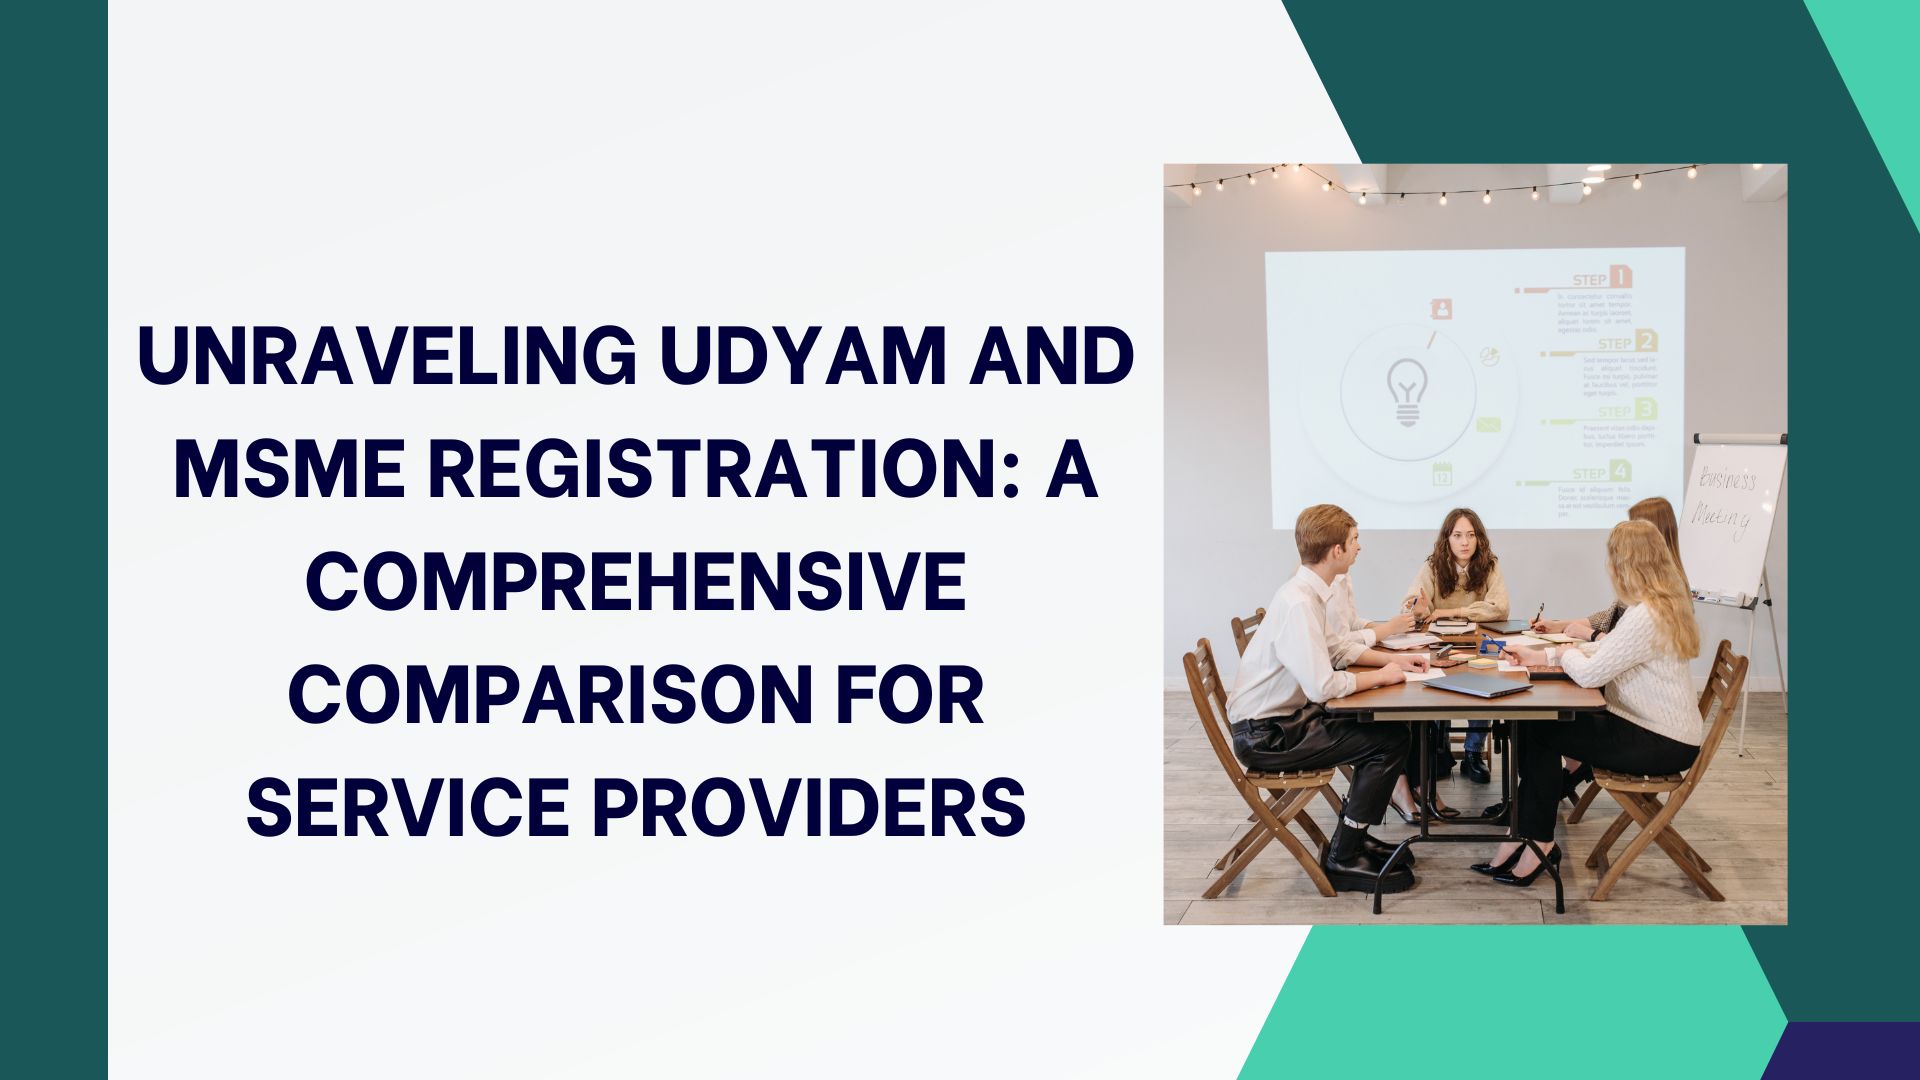 Unraveling Udyam and MSME Registration: A Comprehensive Comparison for Service Providers